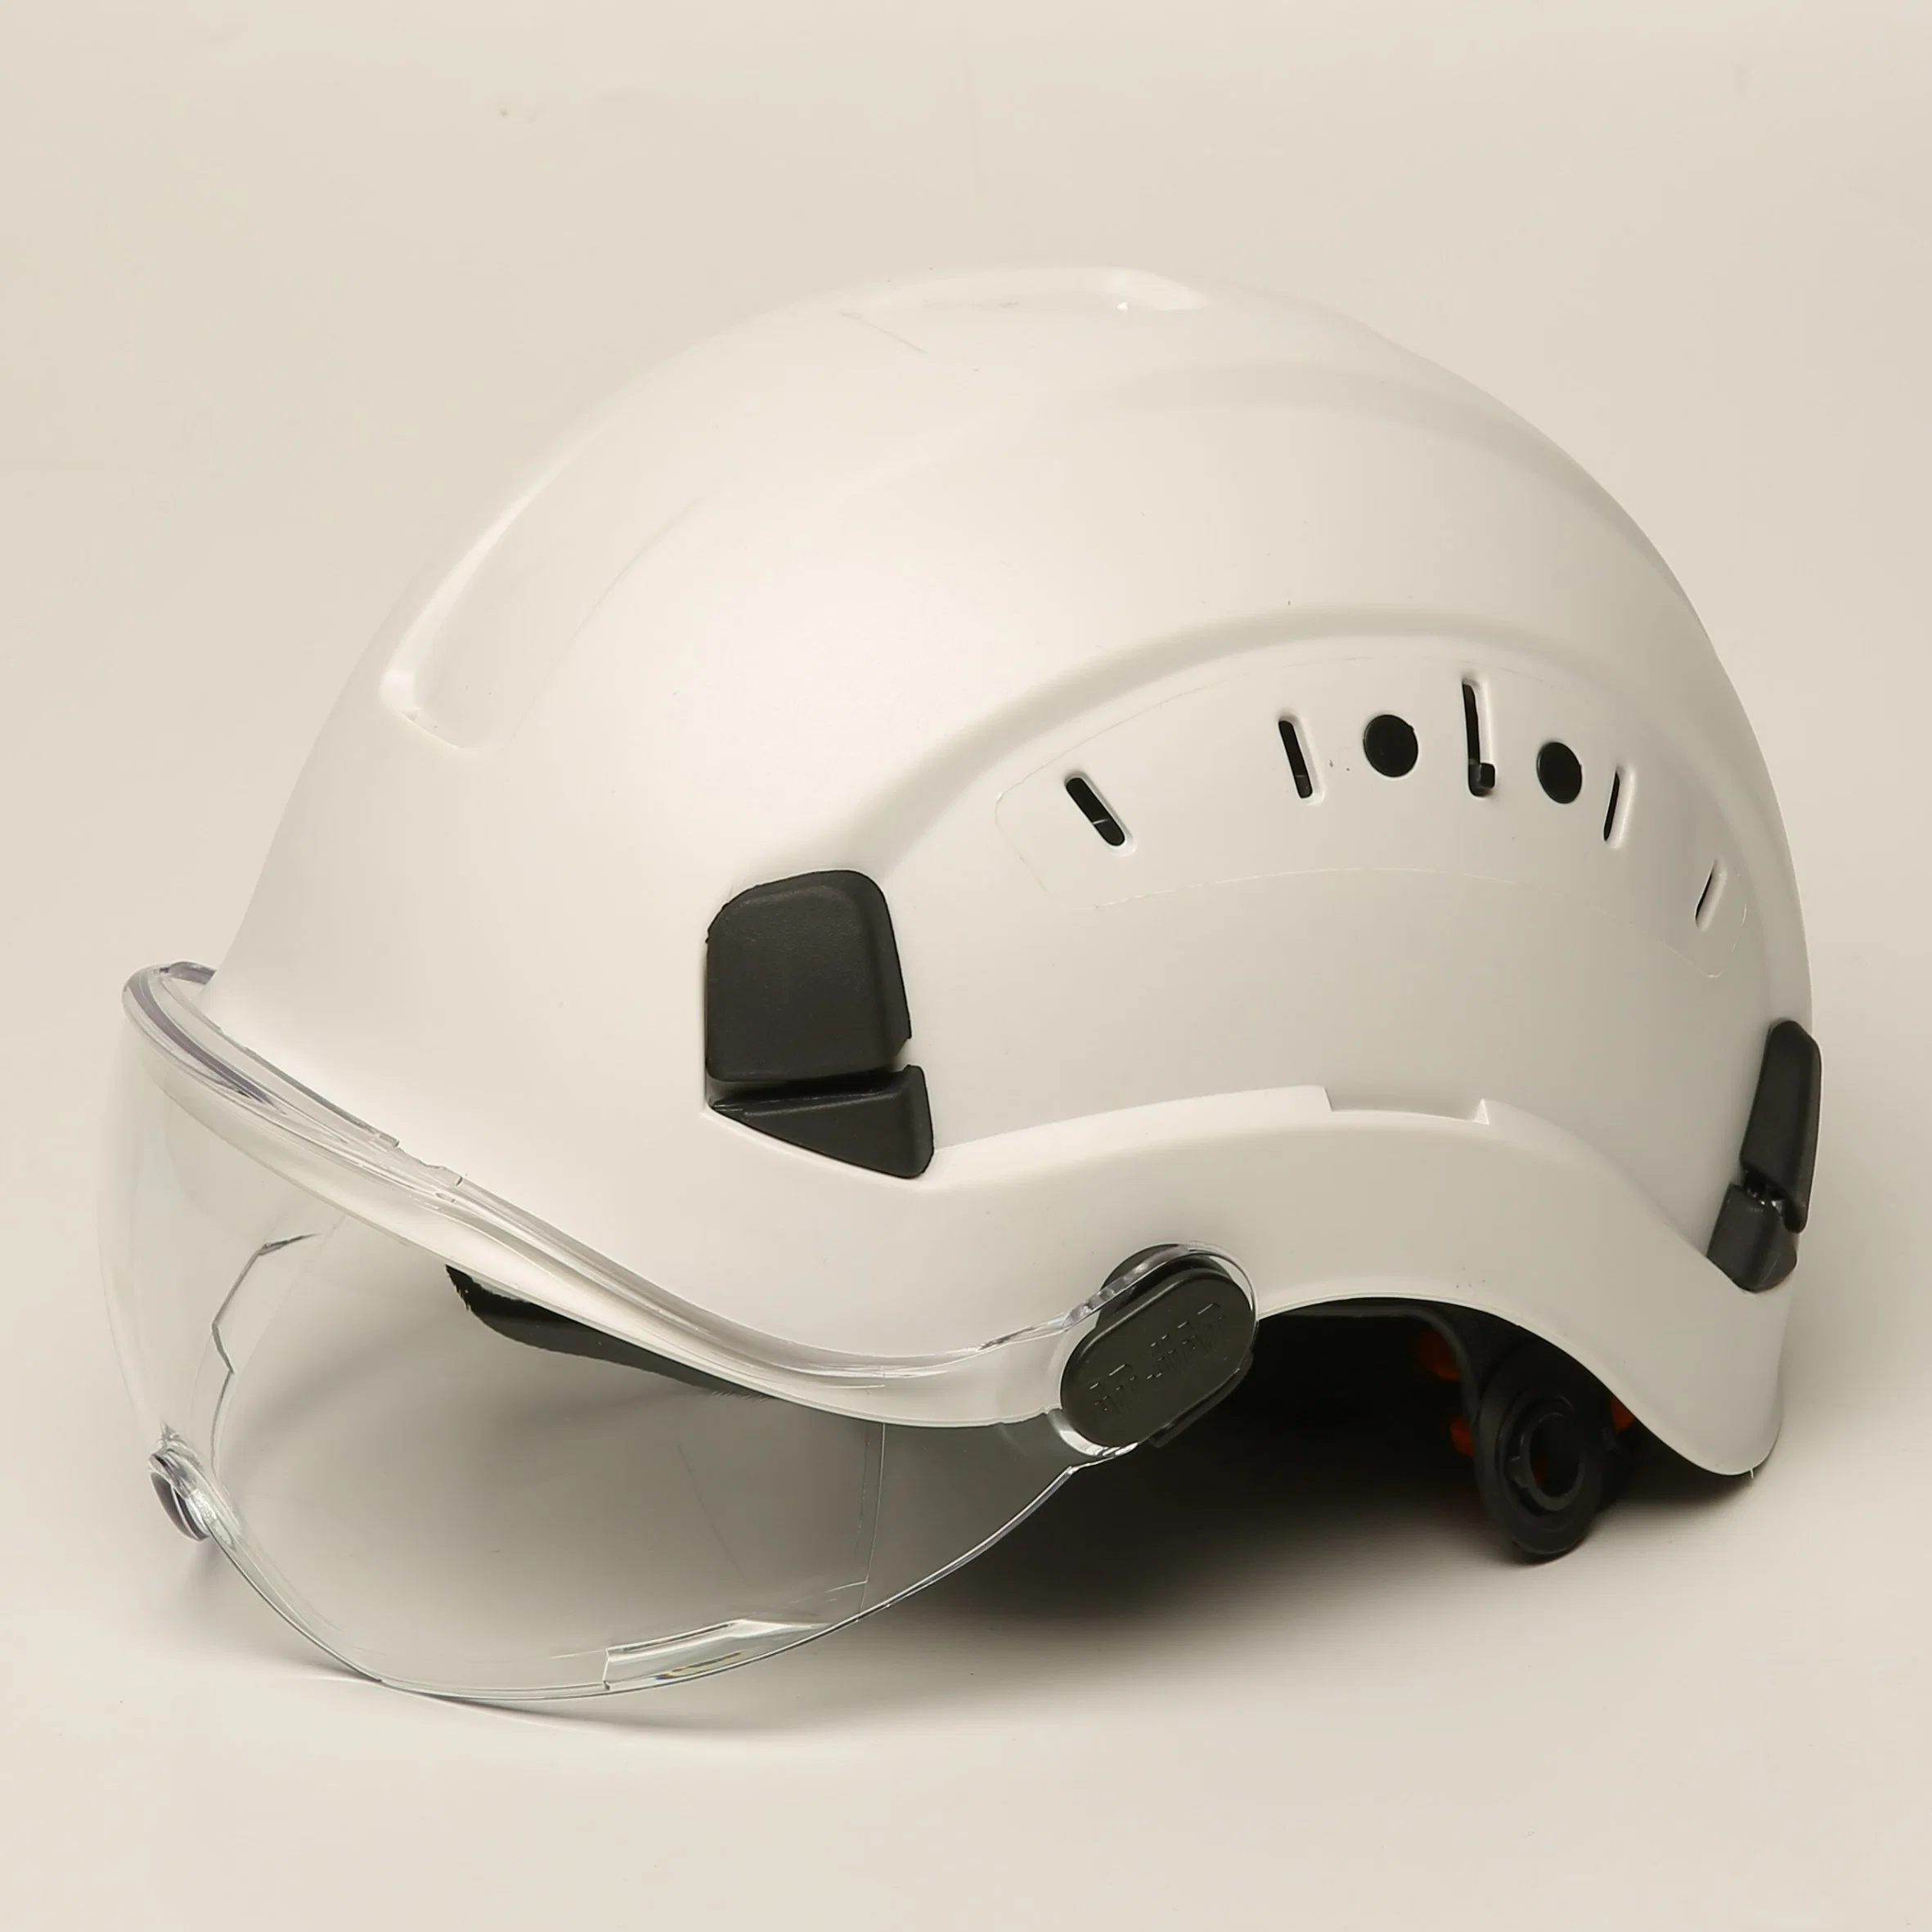 Hot Type ANSI Certified Safety Helmet Industrial Safety Helmet with Visor Safety Helmet with Goggles